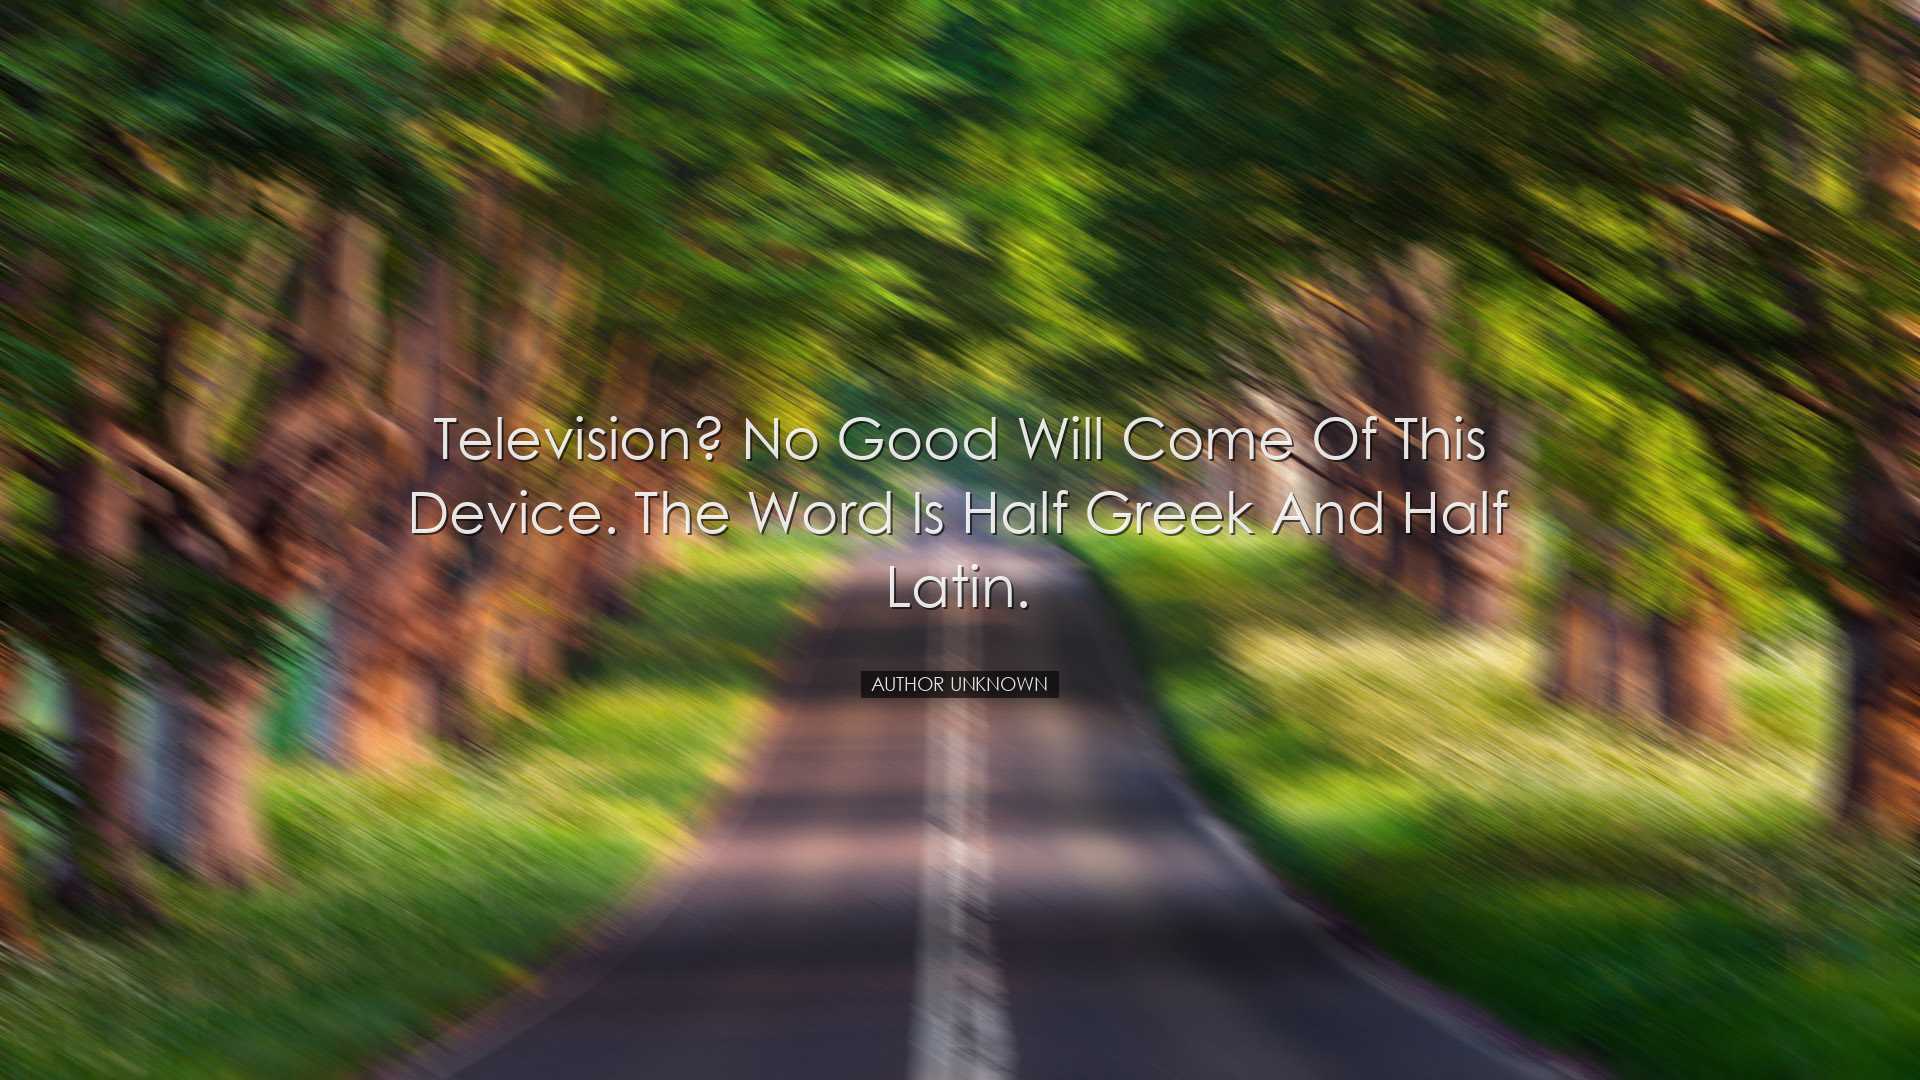 Television? No good will come of this device. The word is half Gre